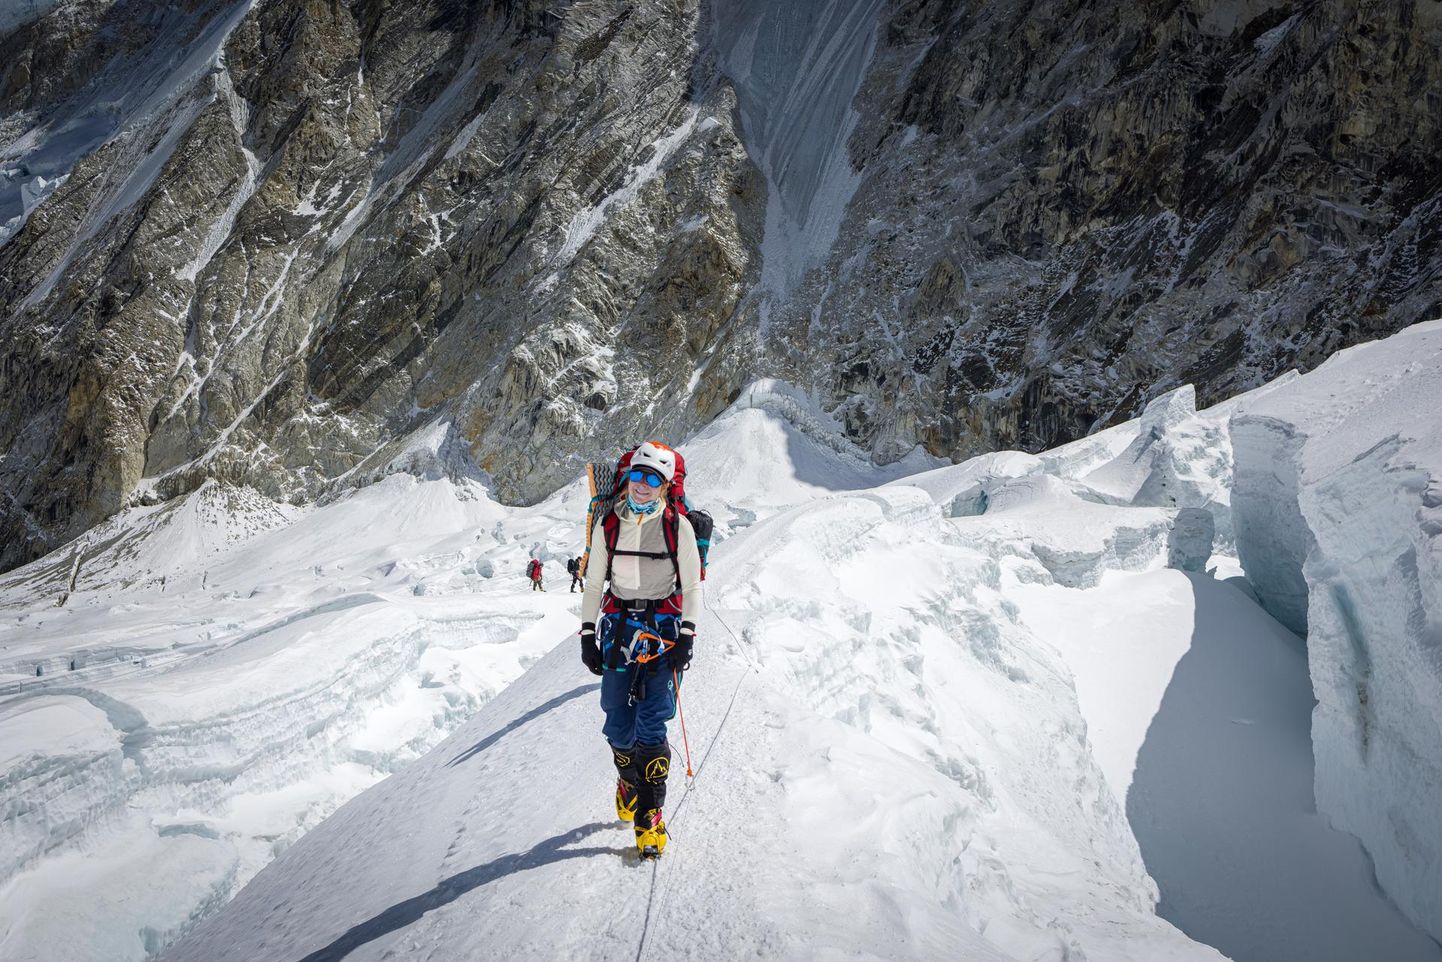 Krisli Melesk reached the summit of the world’s tallest mountain, the 8.848,86 meter Mount Everest.